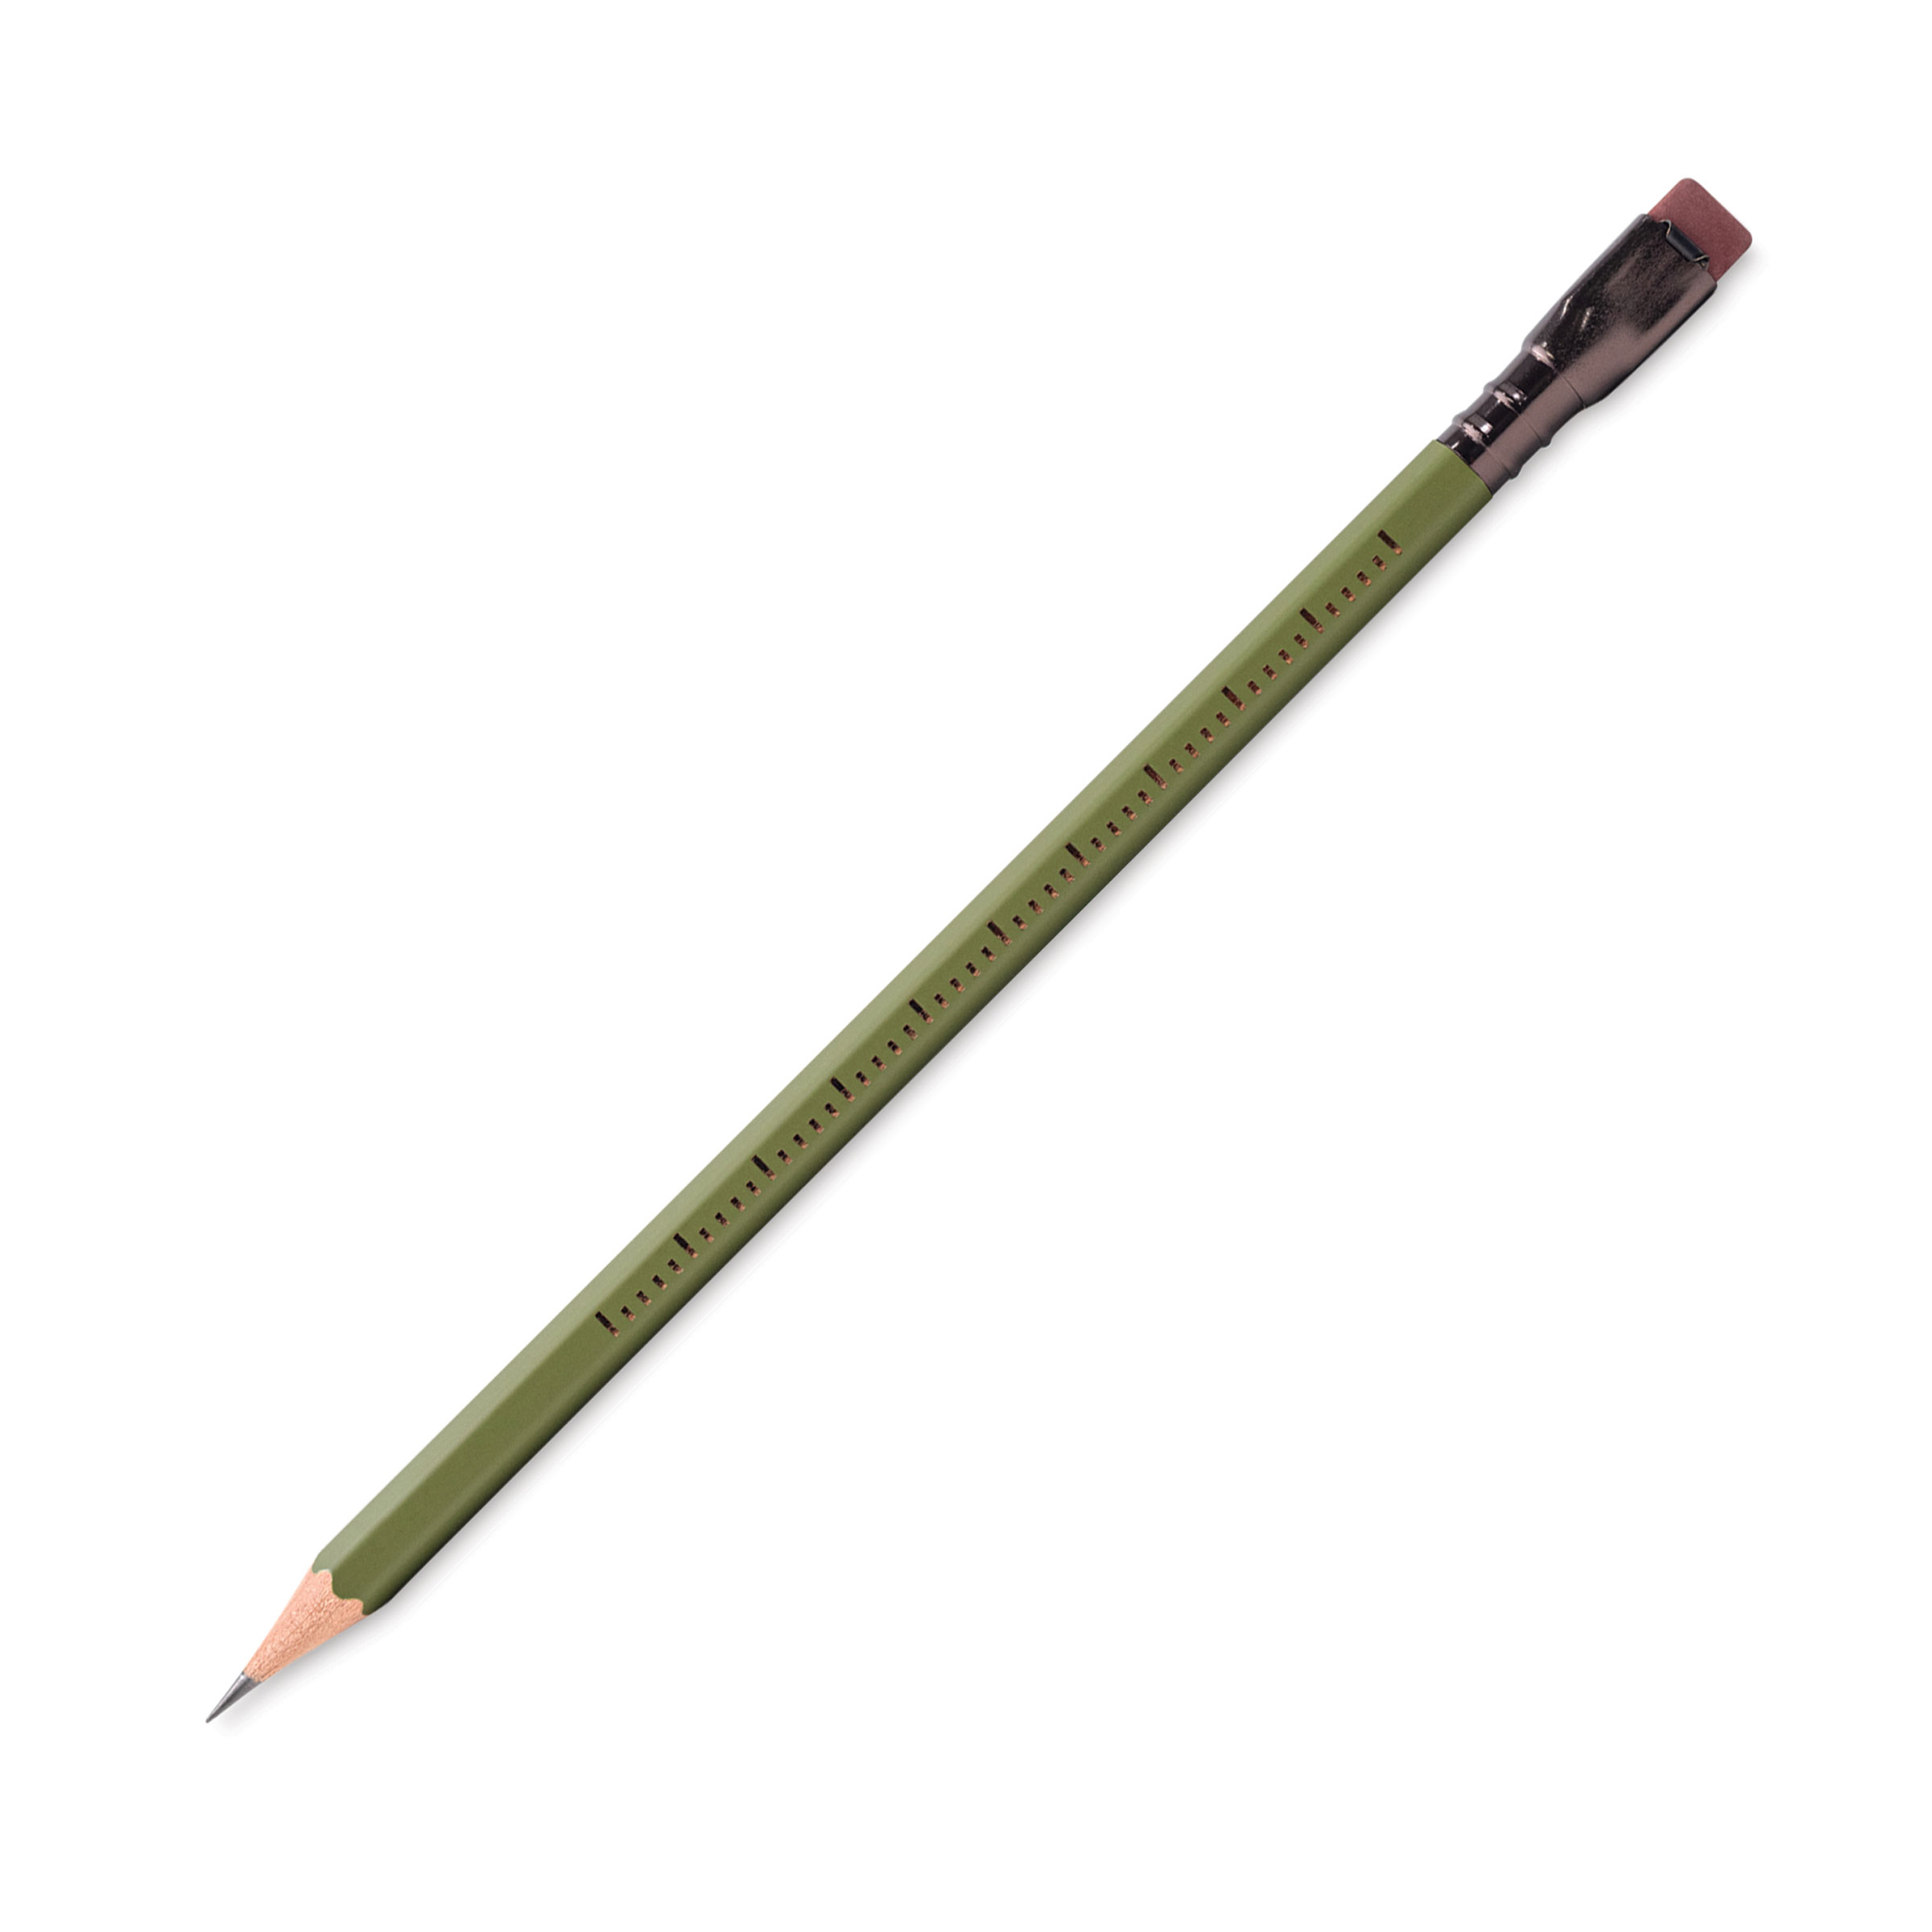 Blackwing Volumes 17: The Gardening Pencil - The Paper Seahorse